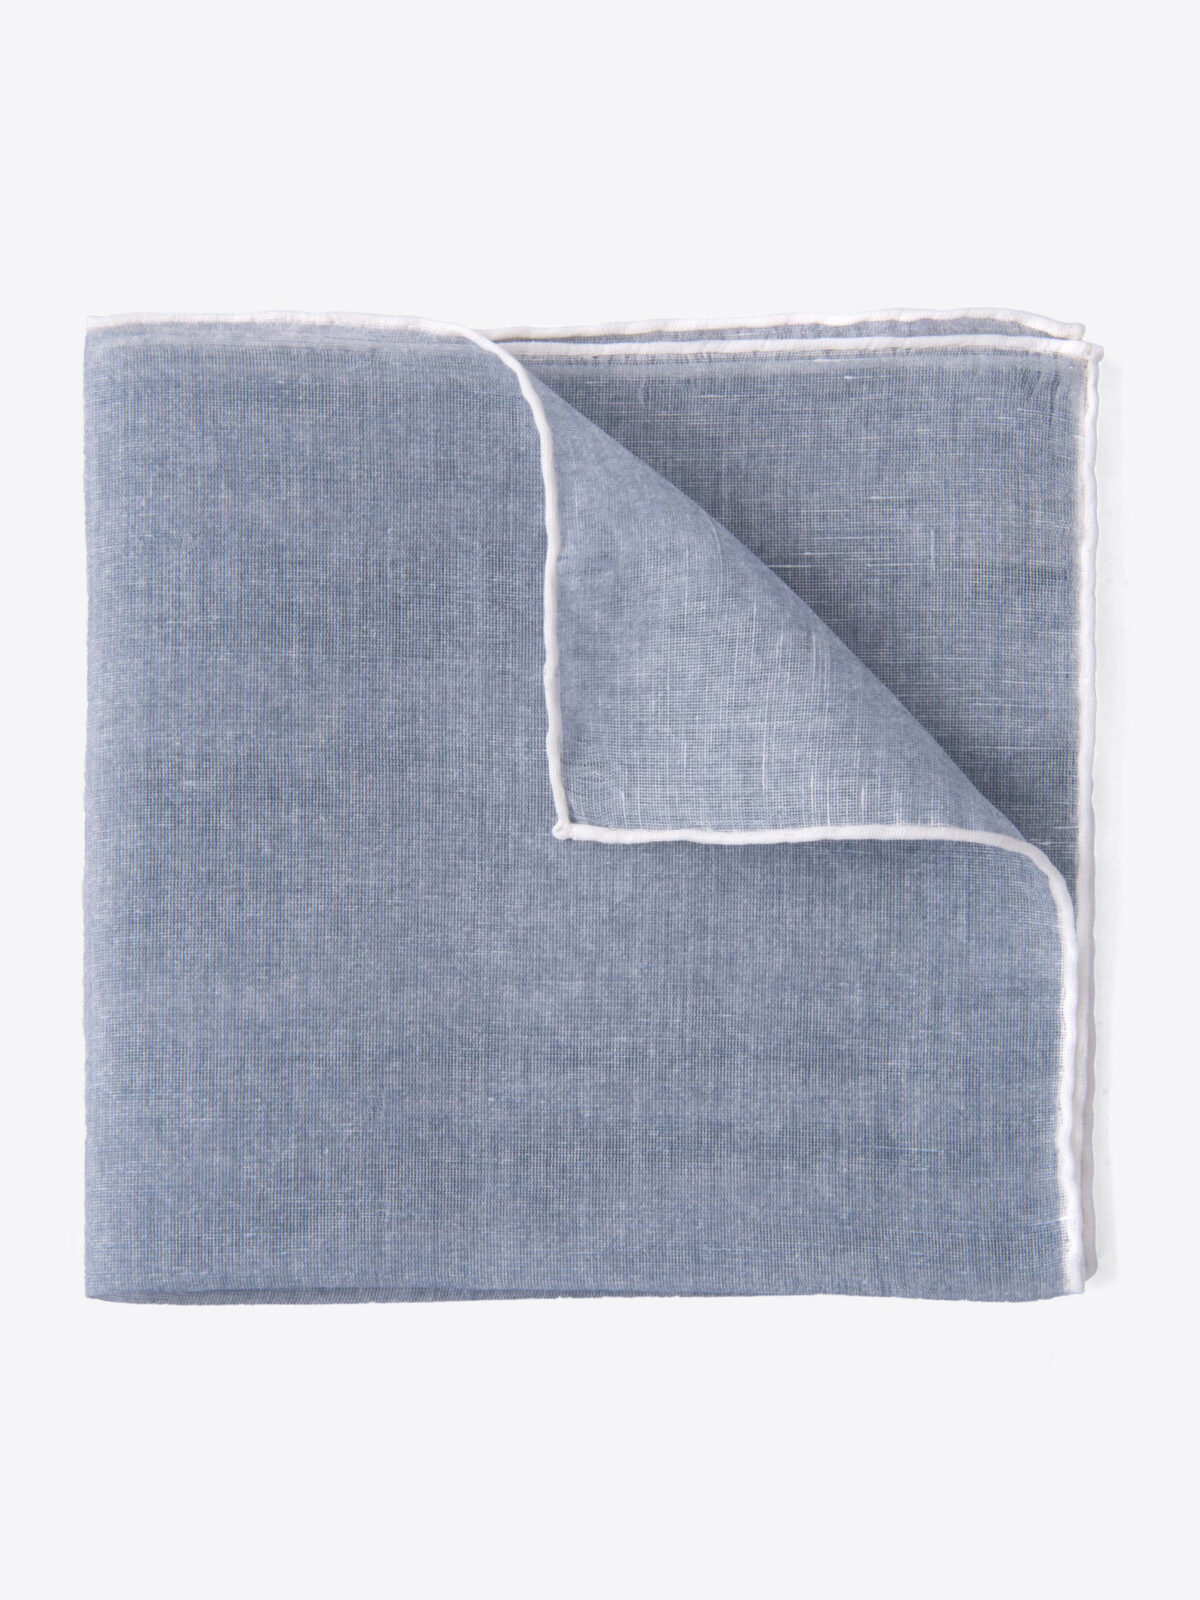 Grey and White Cotton Linen Pocket Square